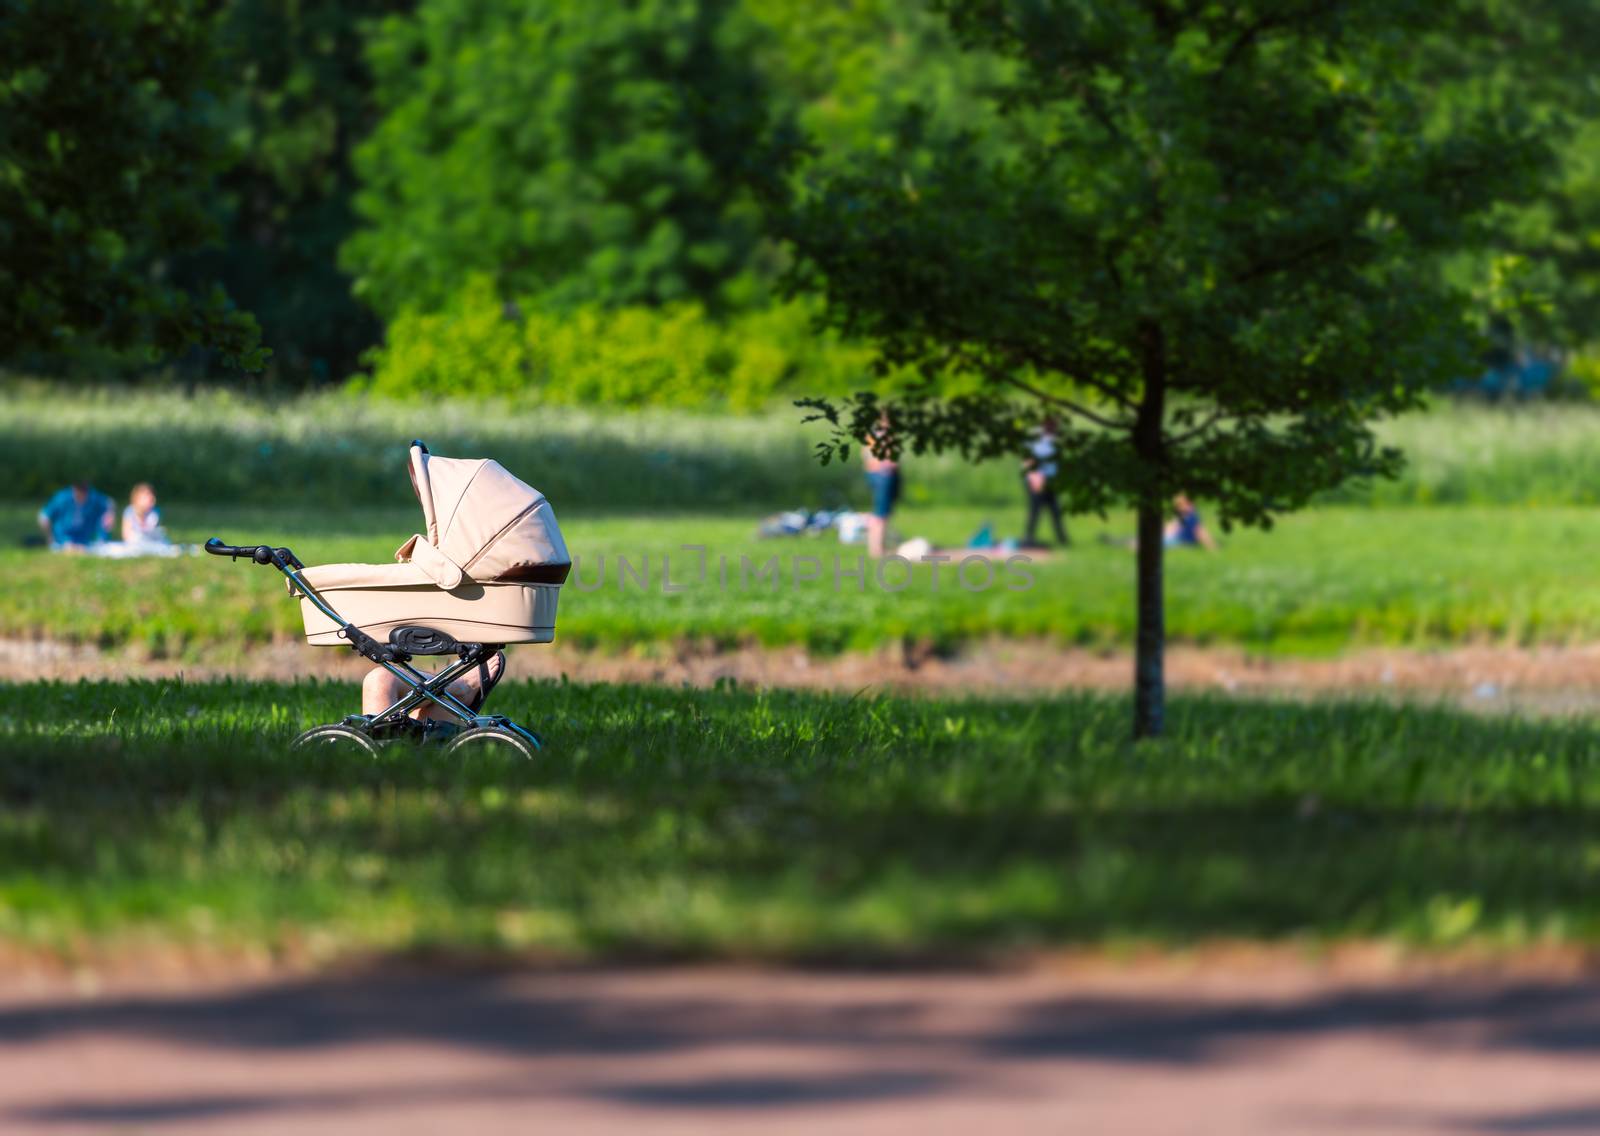 Baby carriage in park with parent nearby by Yolshin